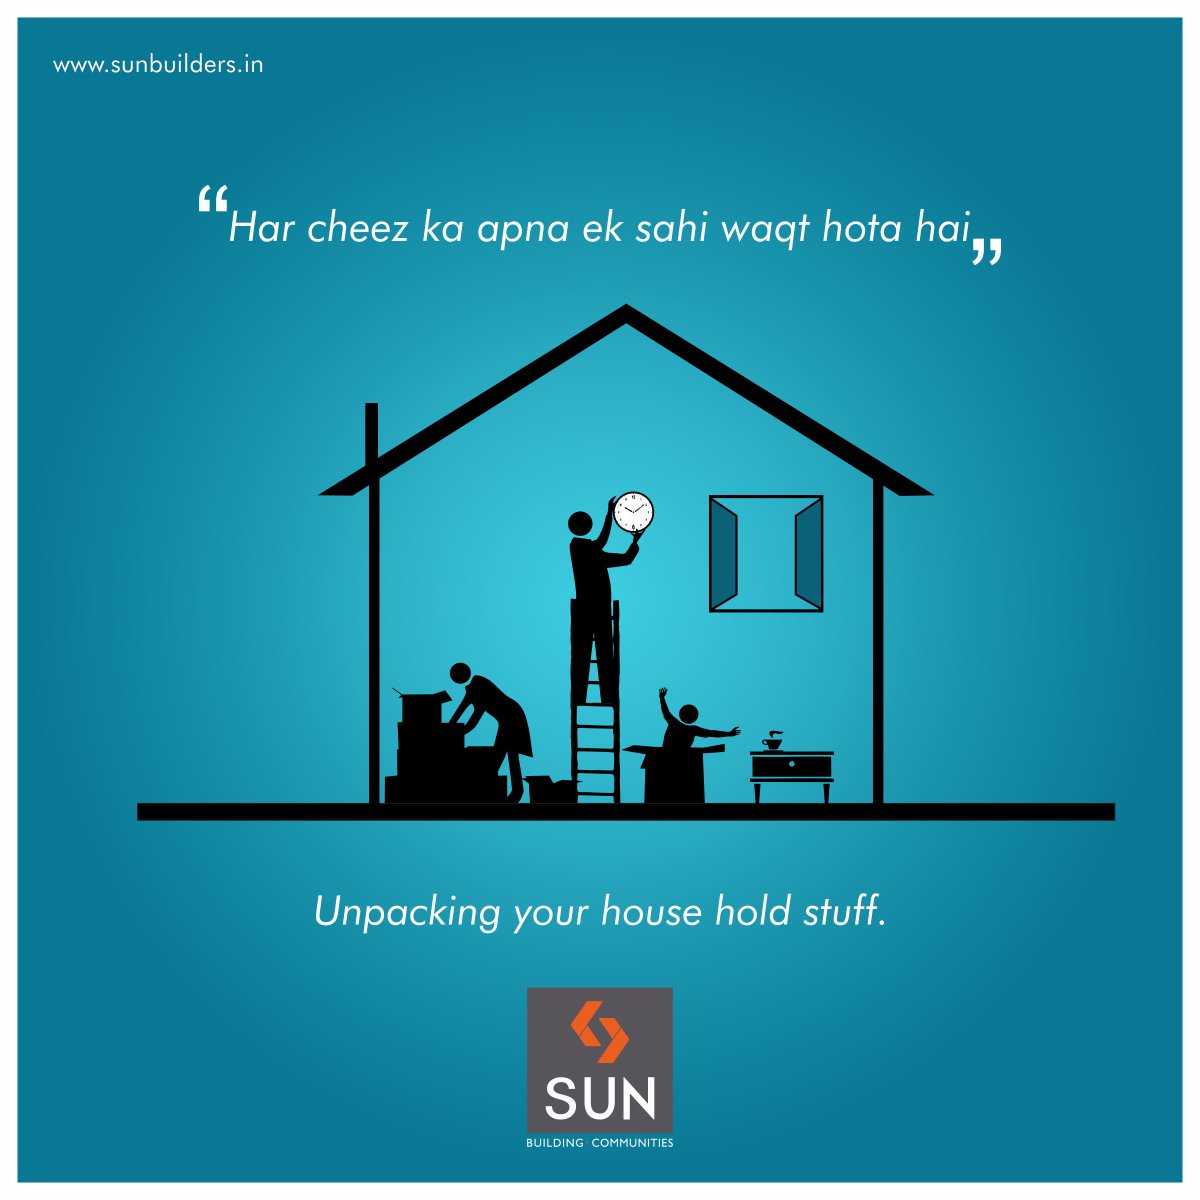 #GharGharKiKahaani:
Unpacking in your new house has its own time. http://t.co/AWSptTQfF9